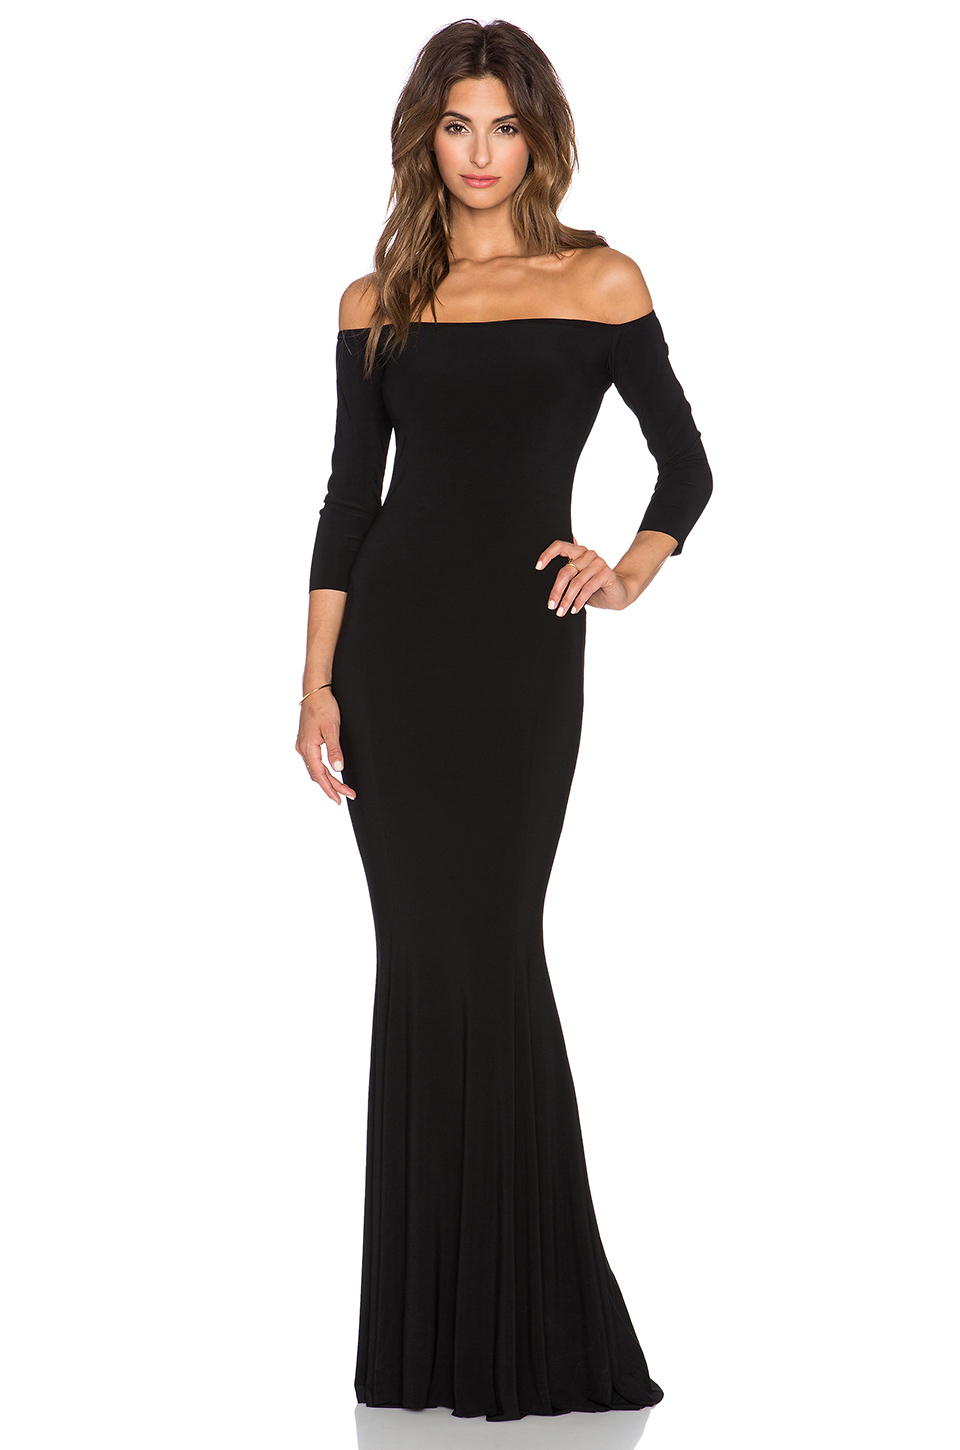 Lyst - Norma Kamali Norma Kulture Off The Shoulder Fishtail Gown in Black